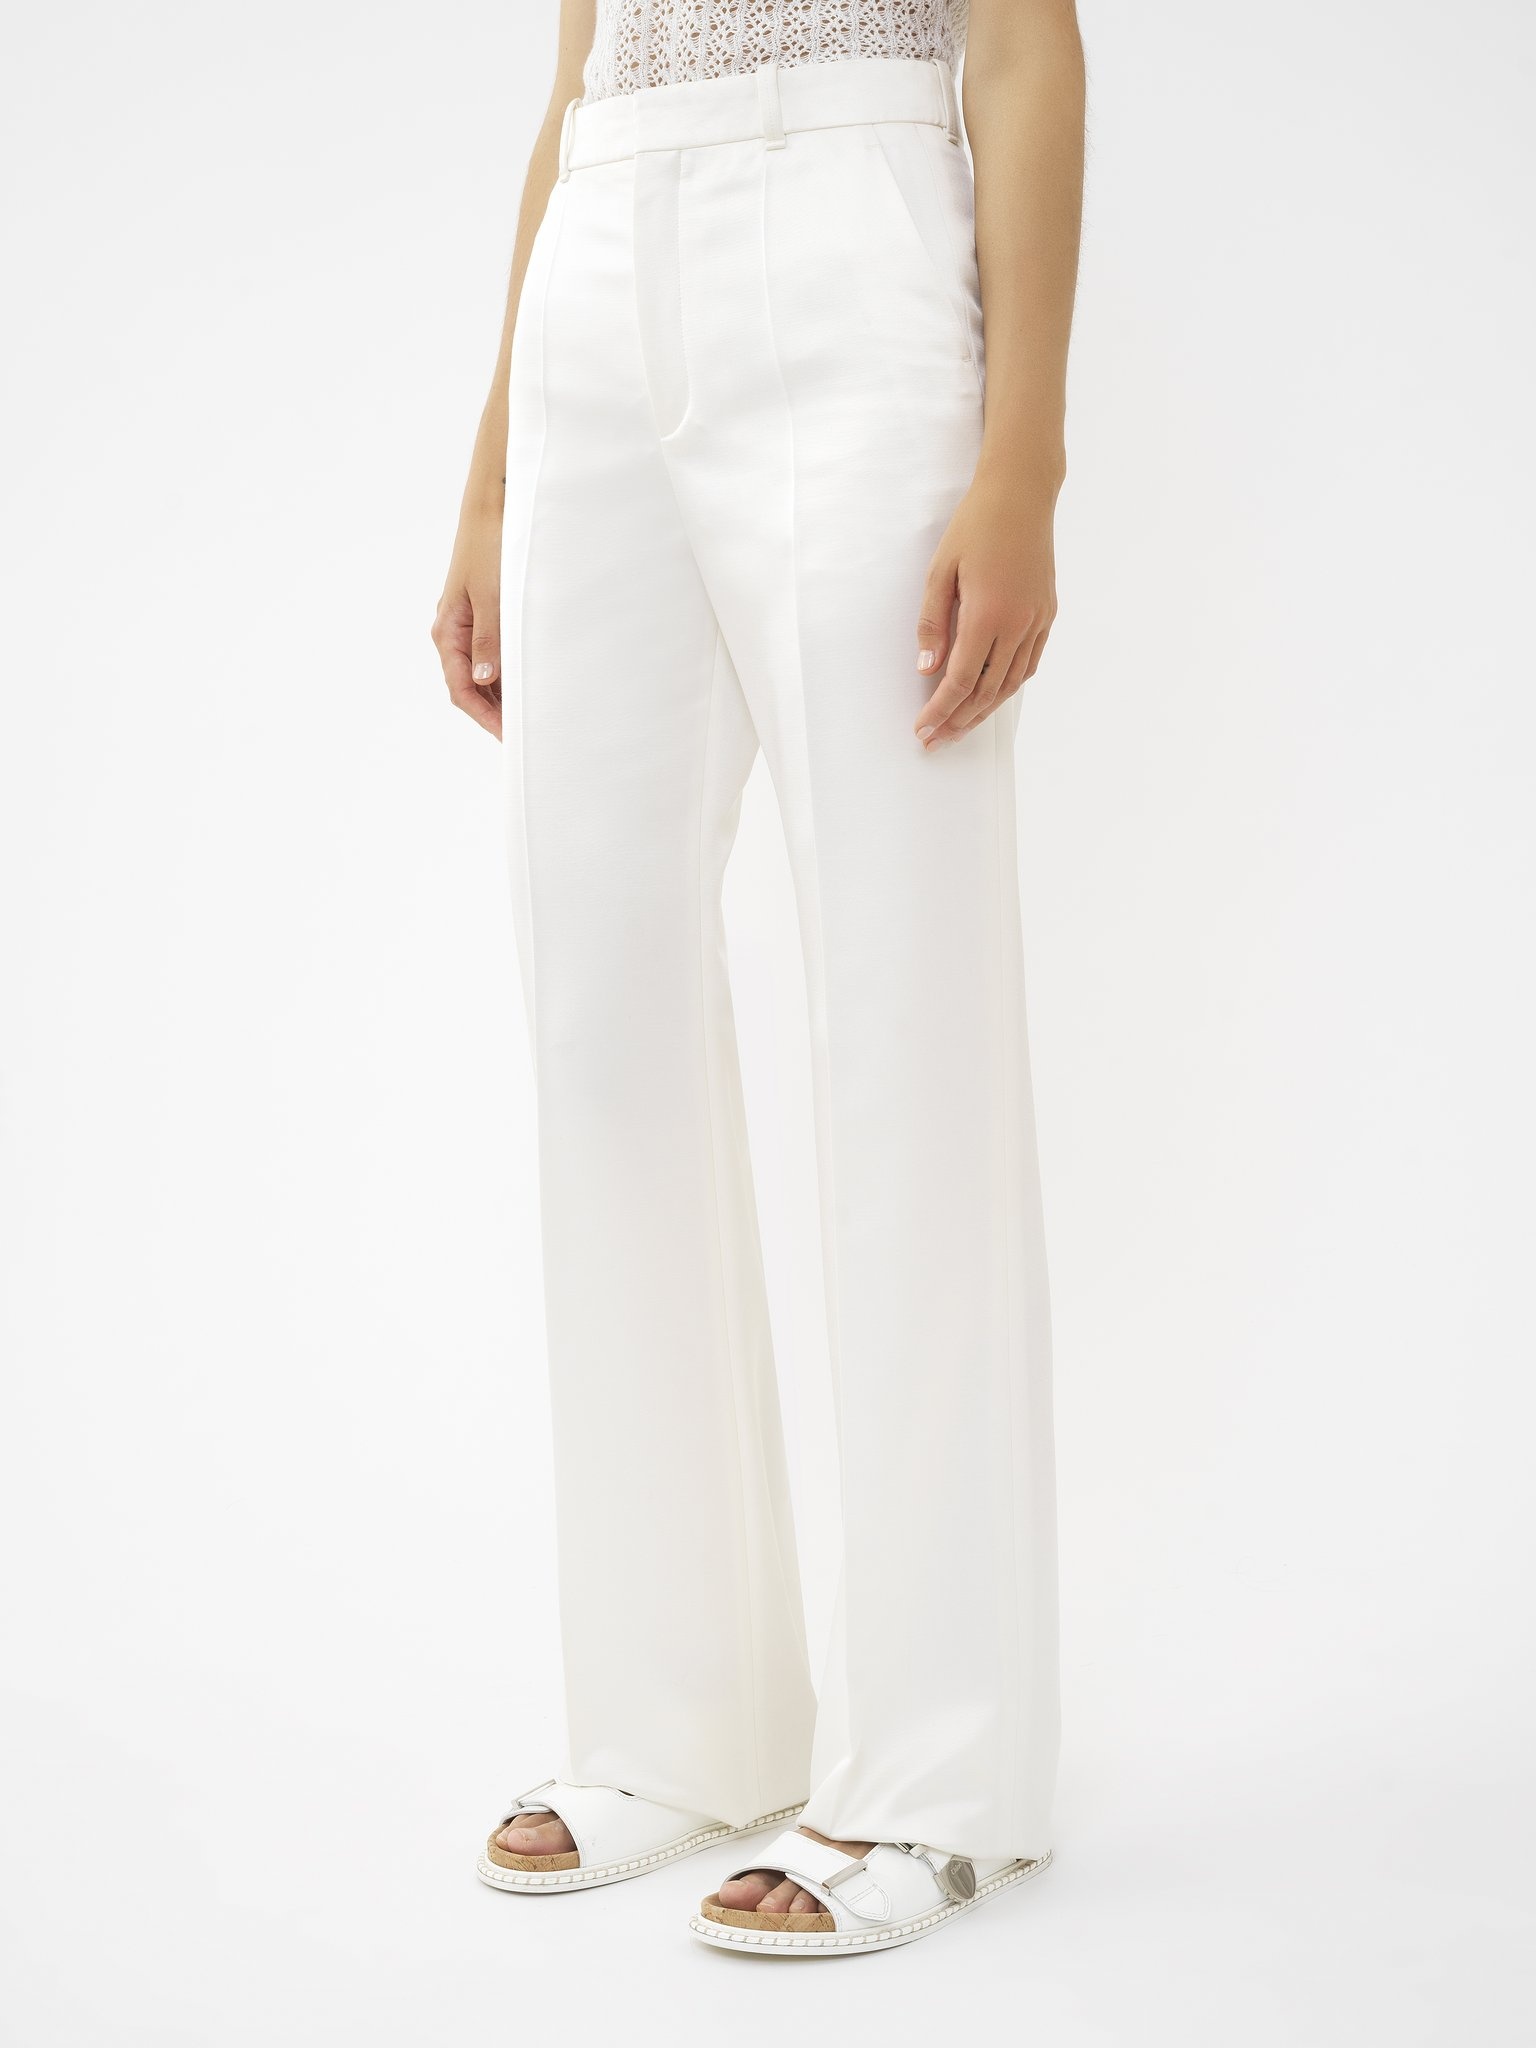 HIGH-RISE TAILORED PANTS - 4